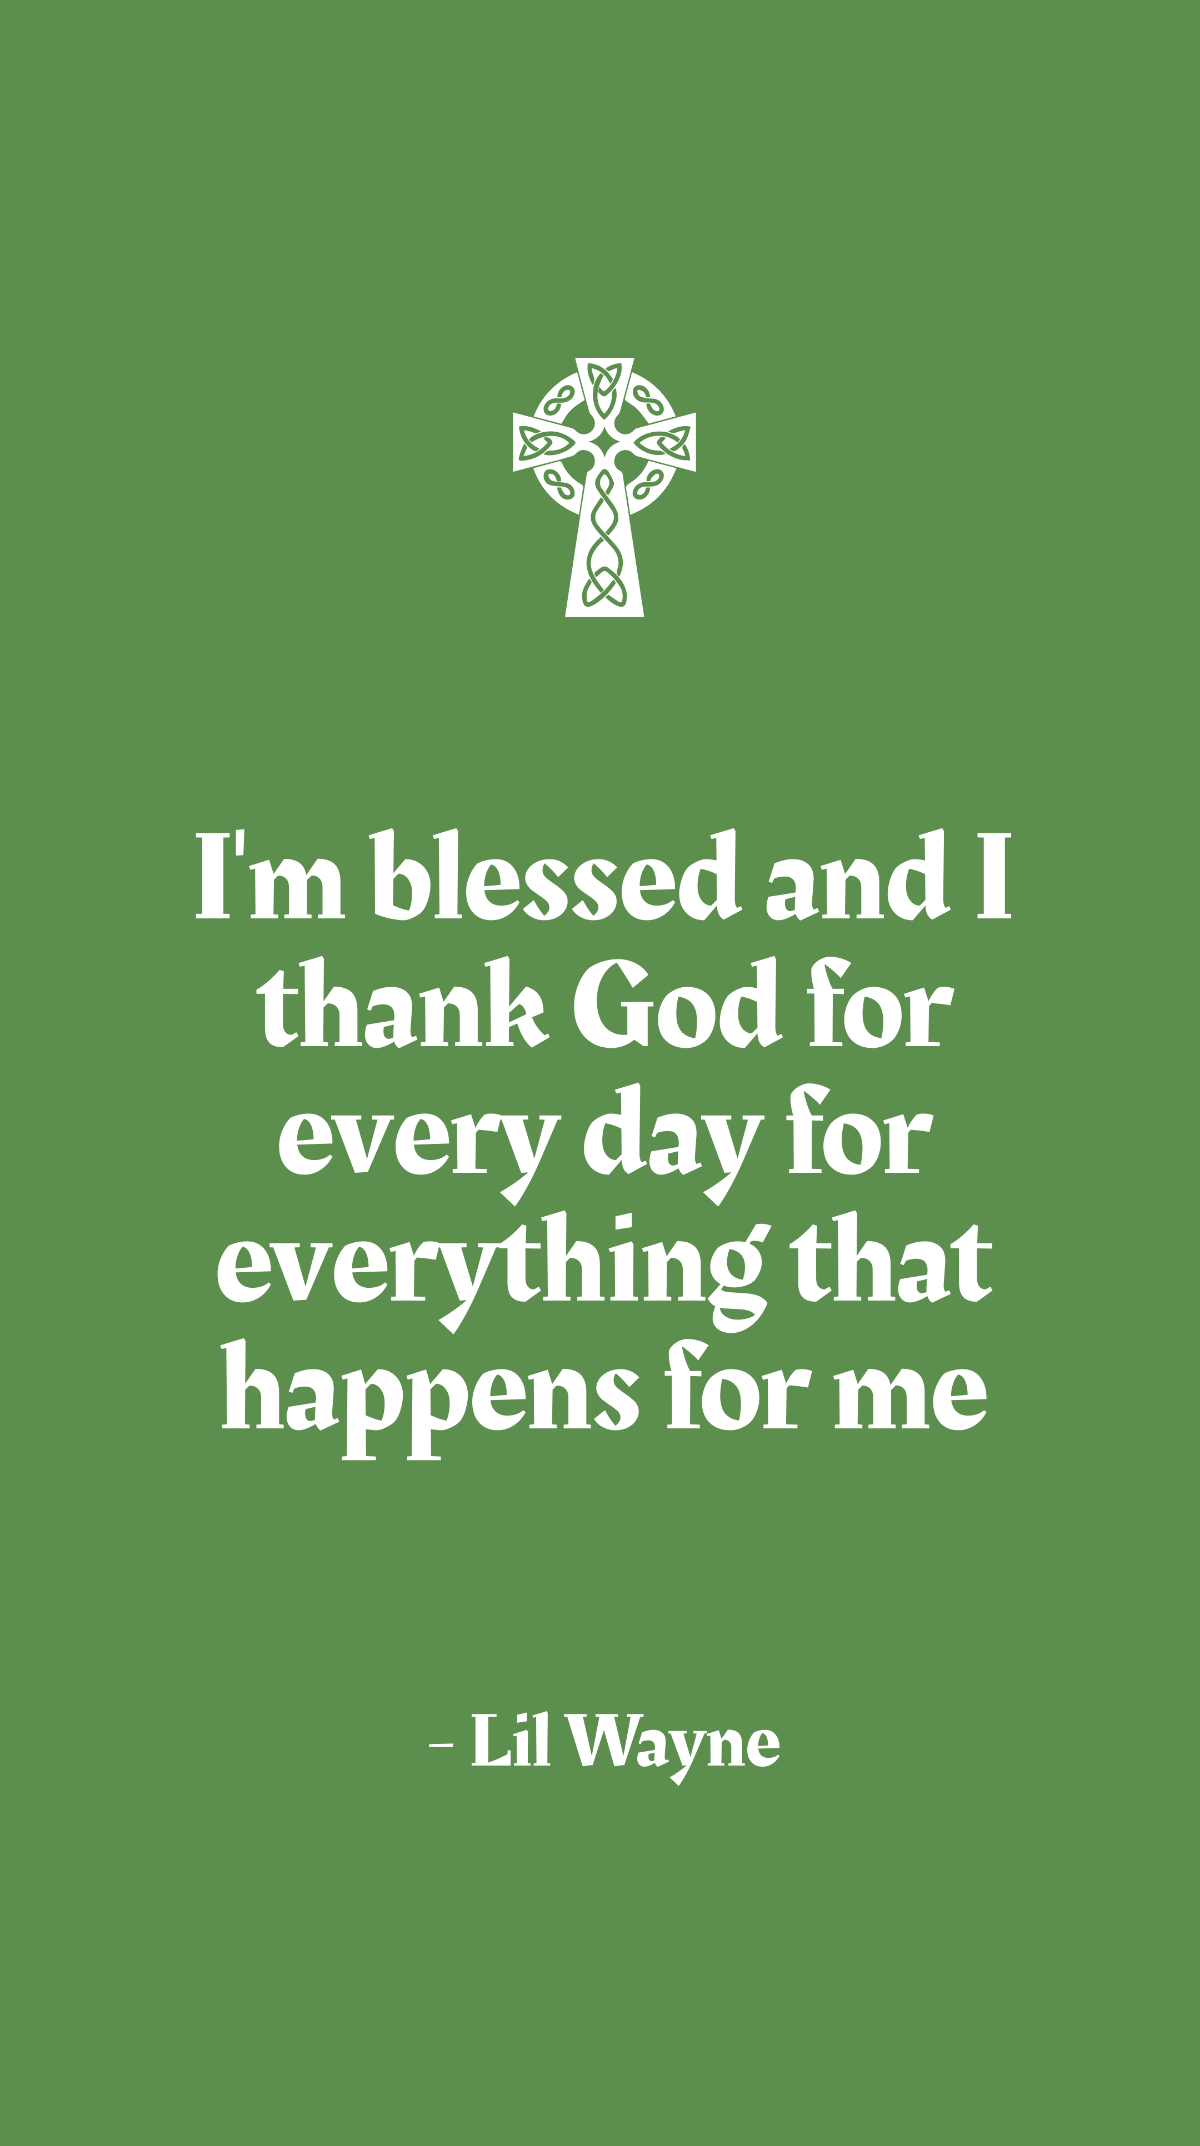 Lil Wayne - I'm blessed and I thank God for every day for everything that happens for me Template